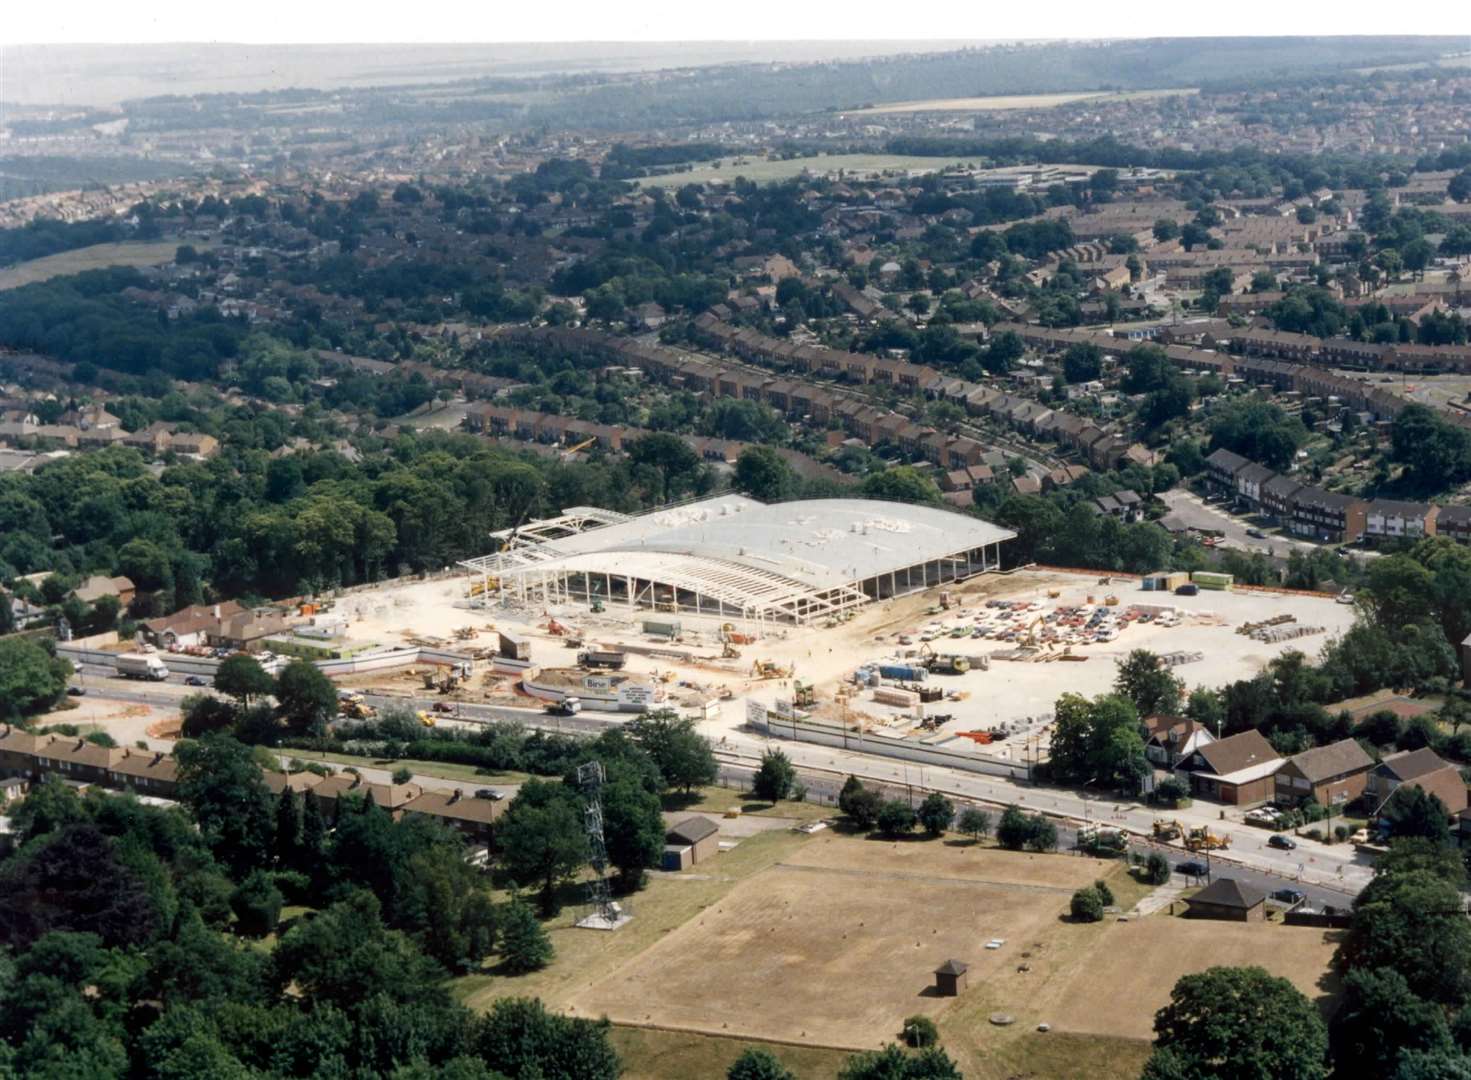 Asda in Chatham being constructed in 1996